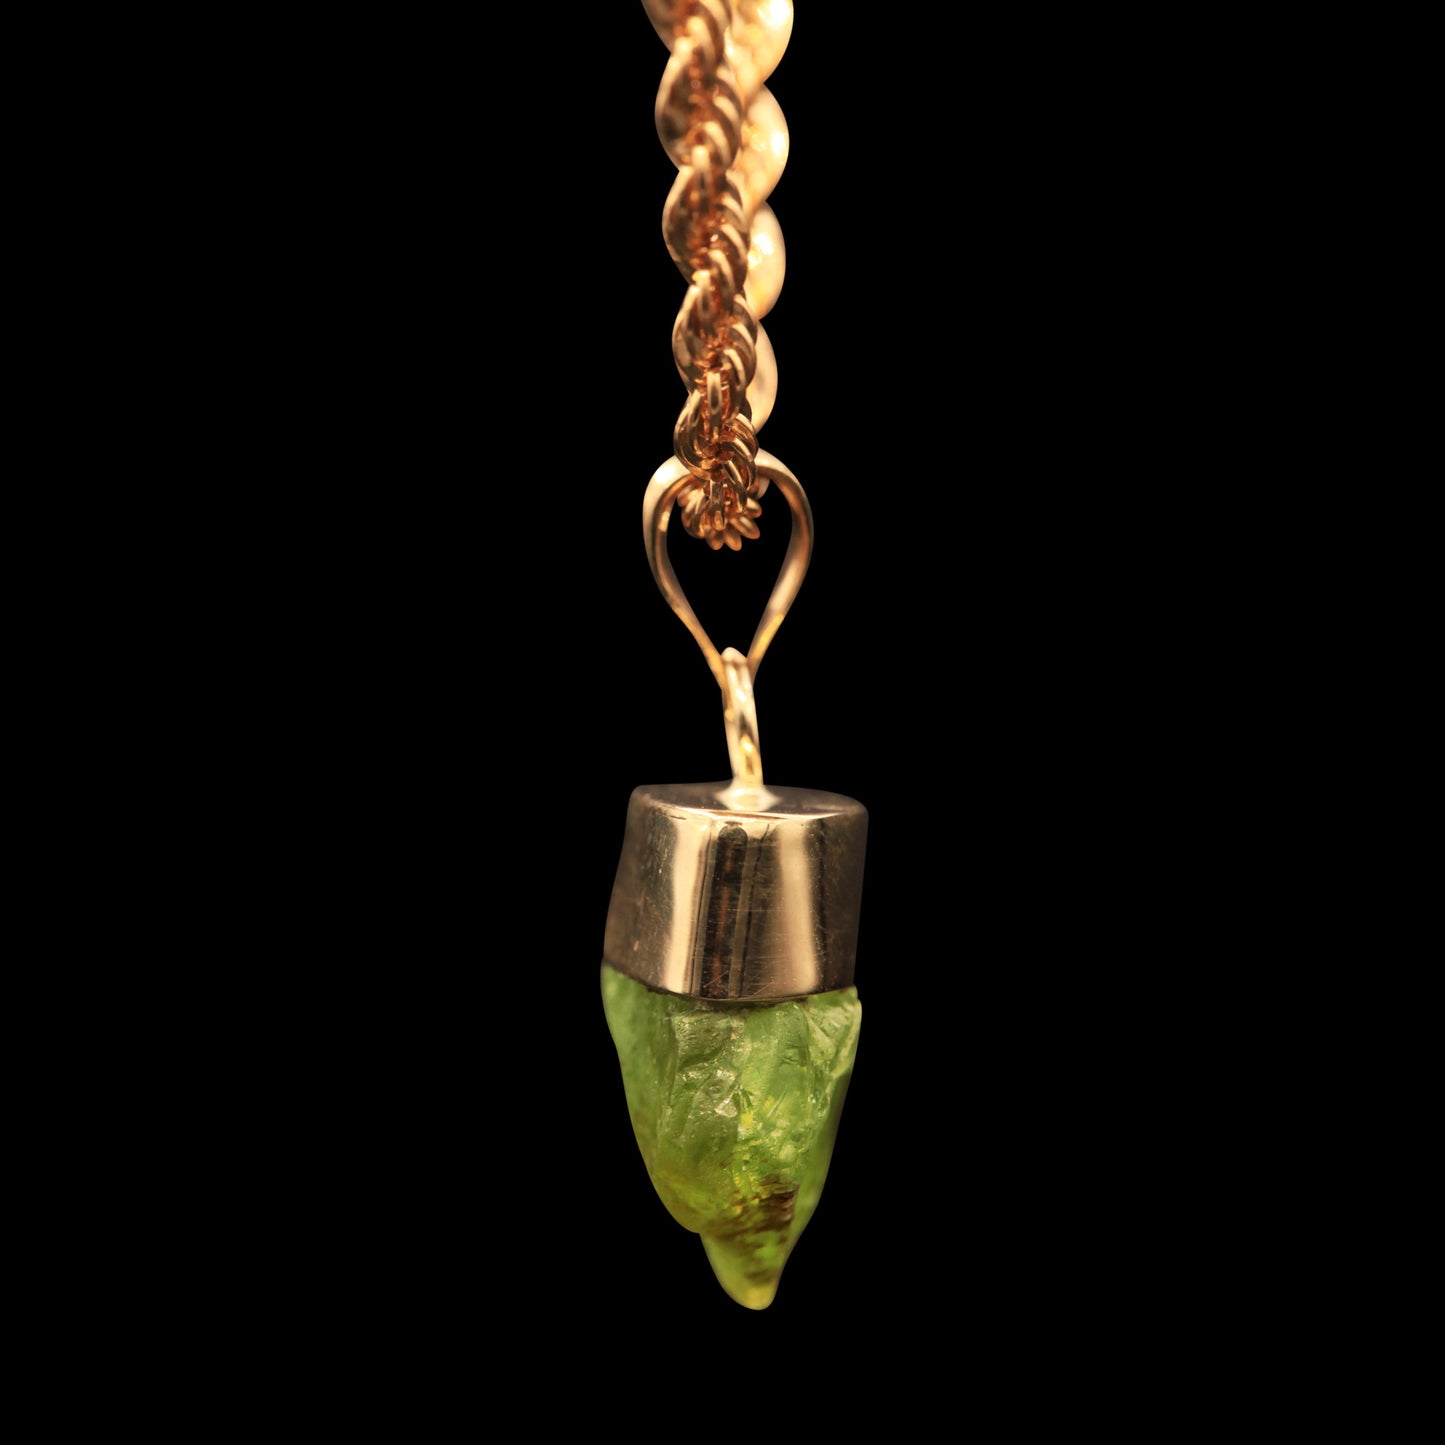 8 CARAT NATURAL UNTREATED SOUTH AFRICAN PERIDOT GEM ON ROPE